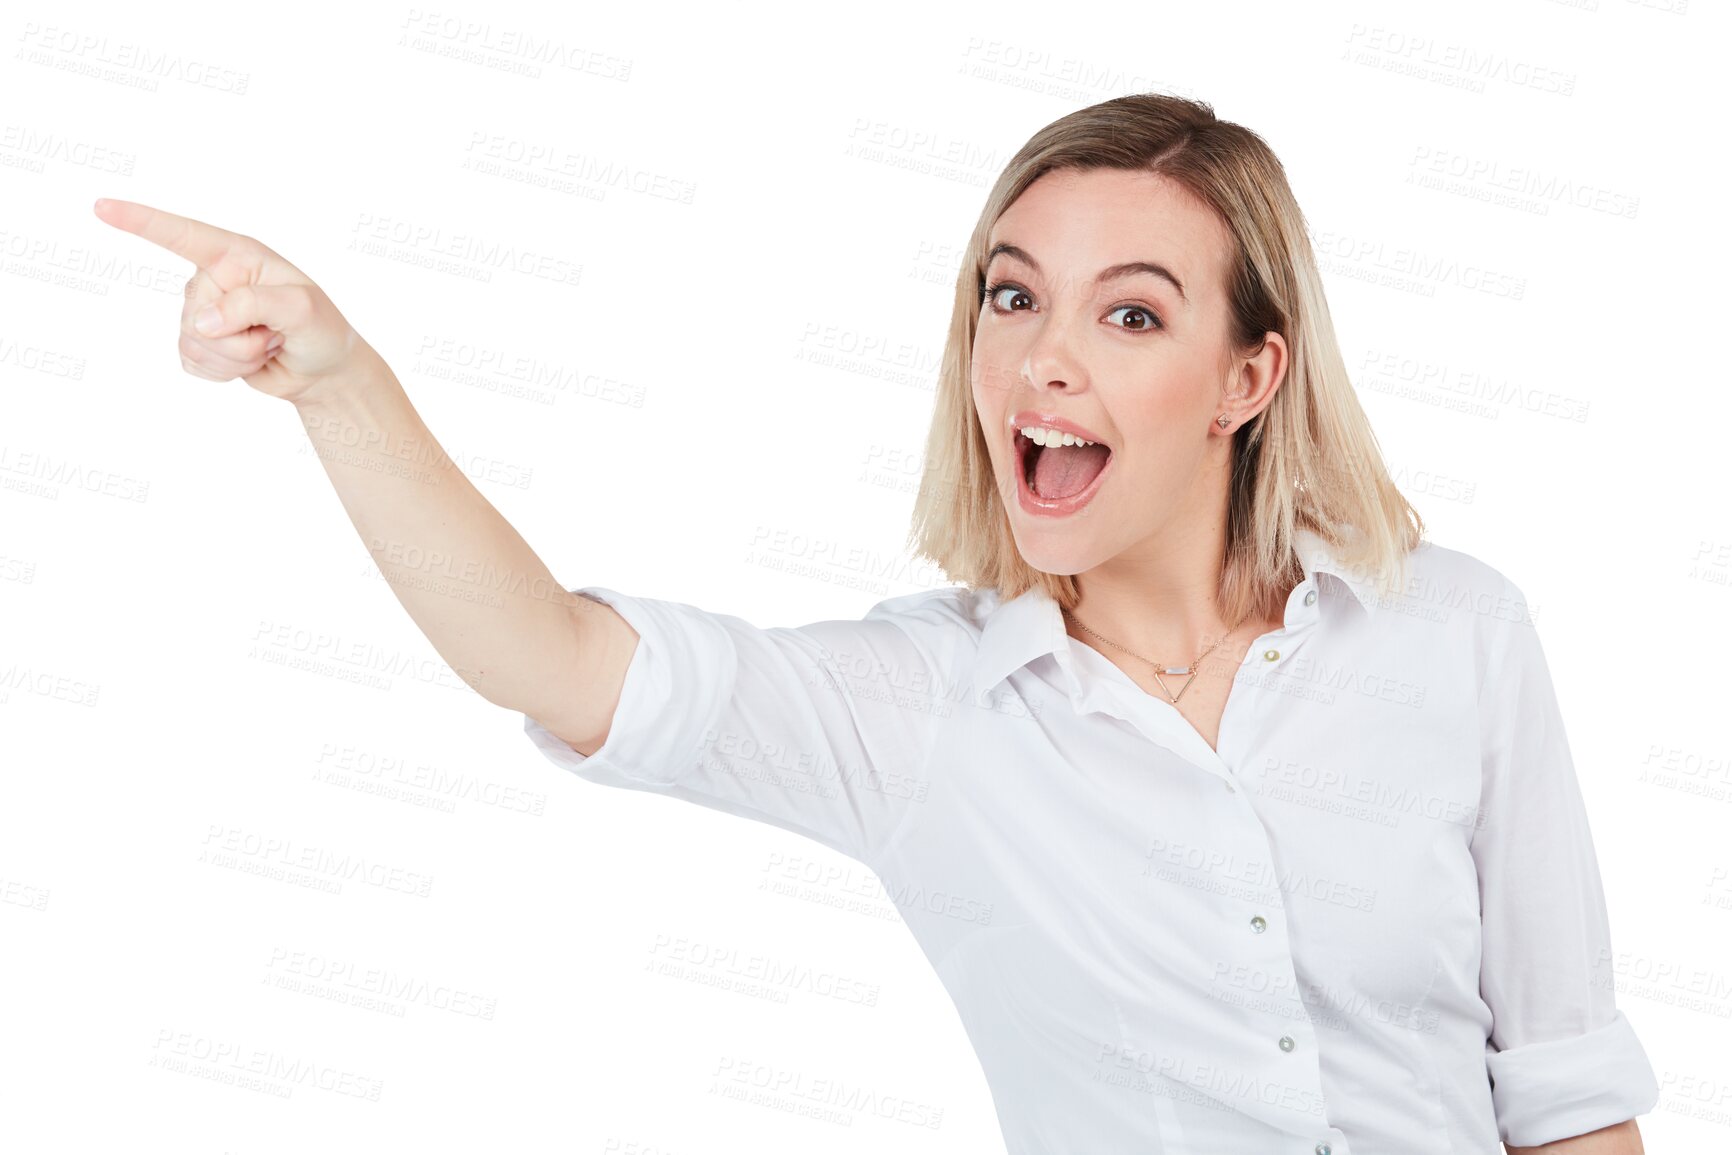 Buy stock photo Portrait, excited and business woman point at advertising information, brand logo or product sales promotion. Discount, commercial and professional person isolated on a transparent, png background